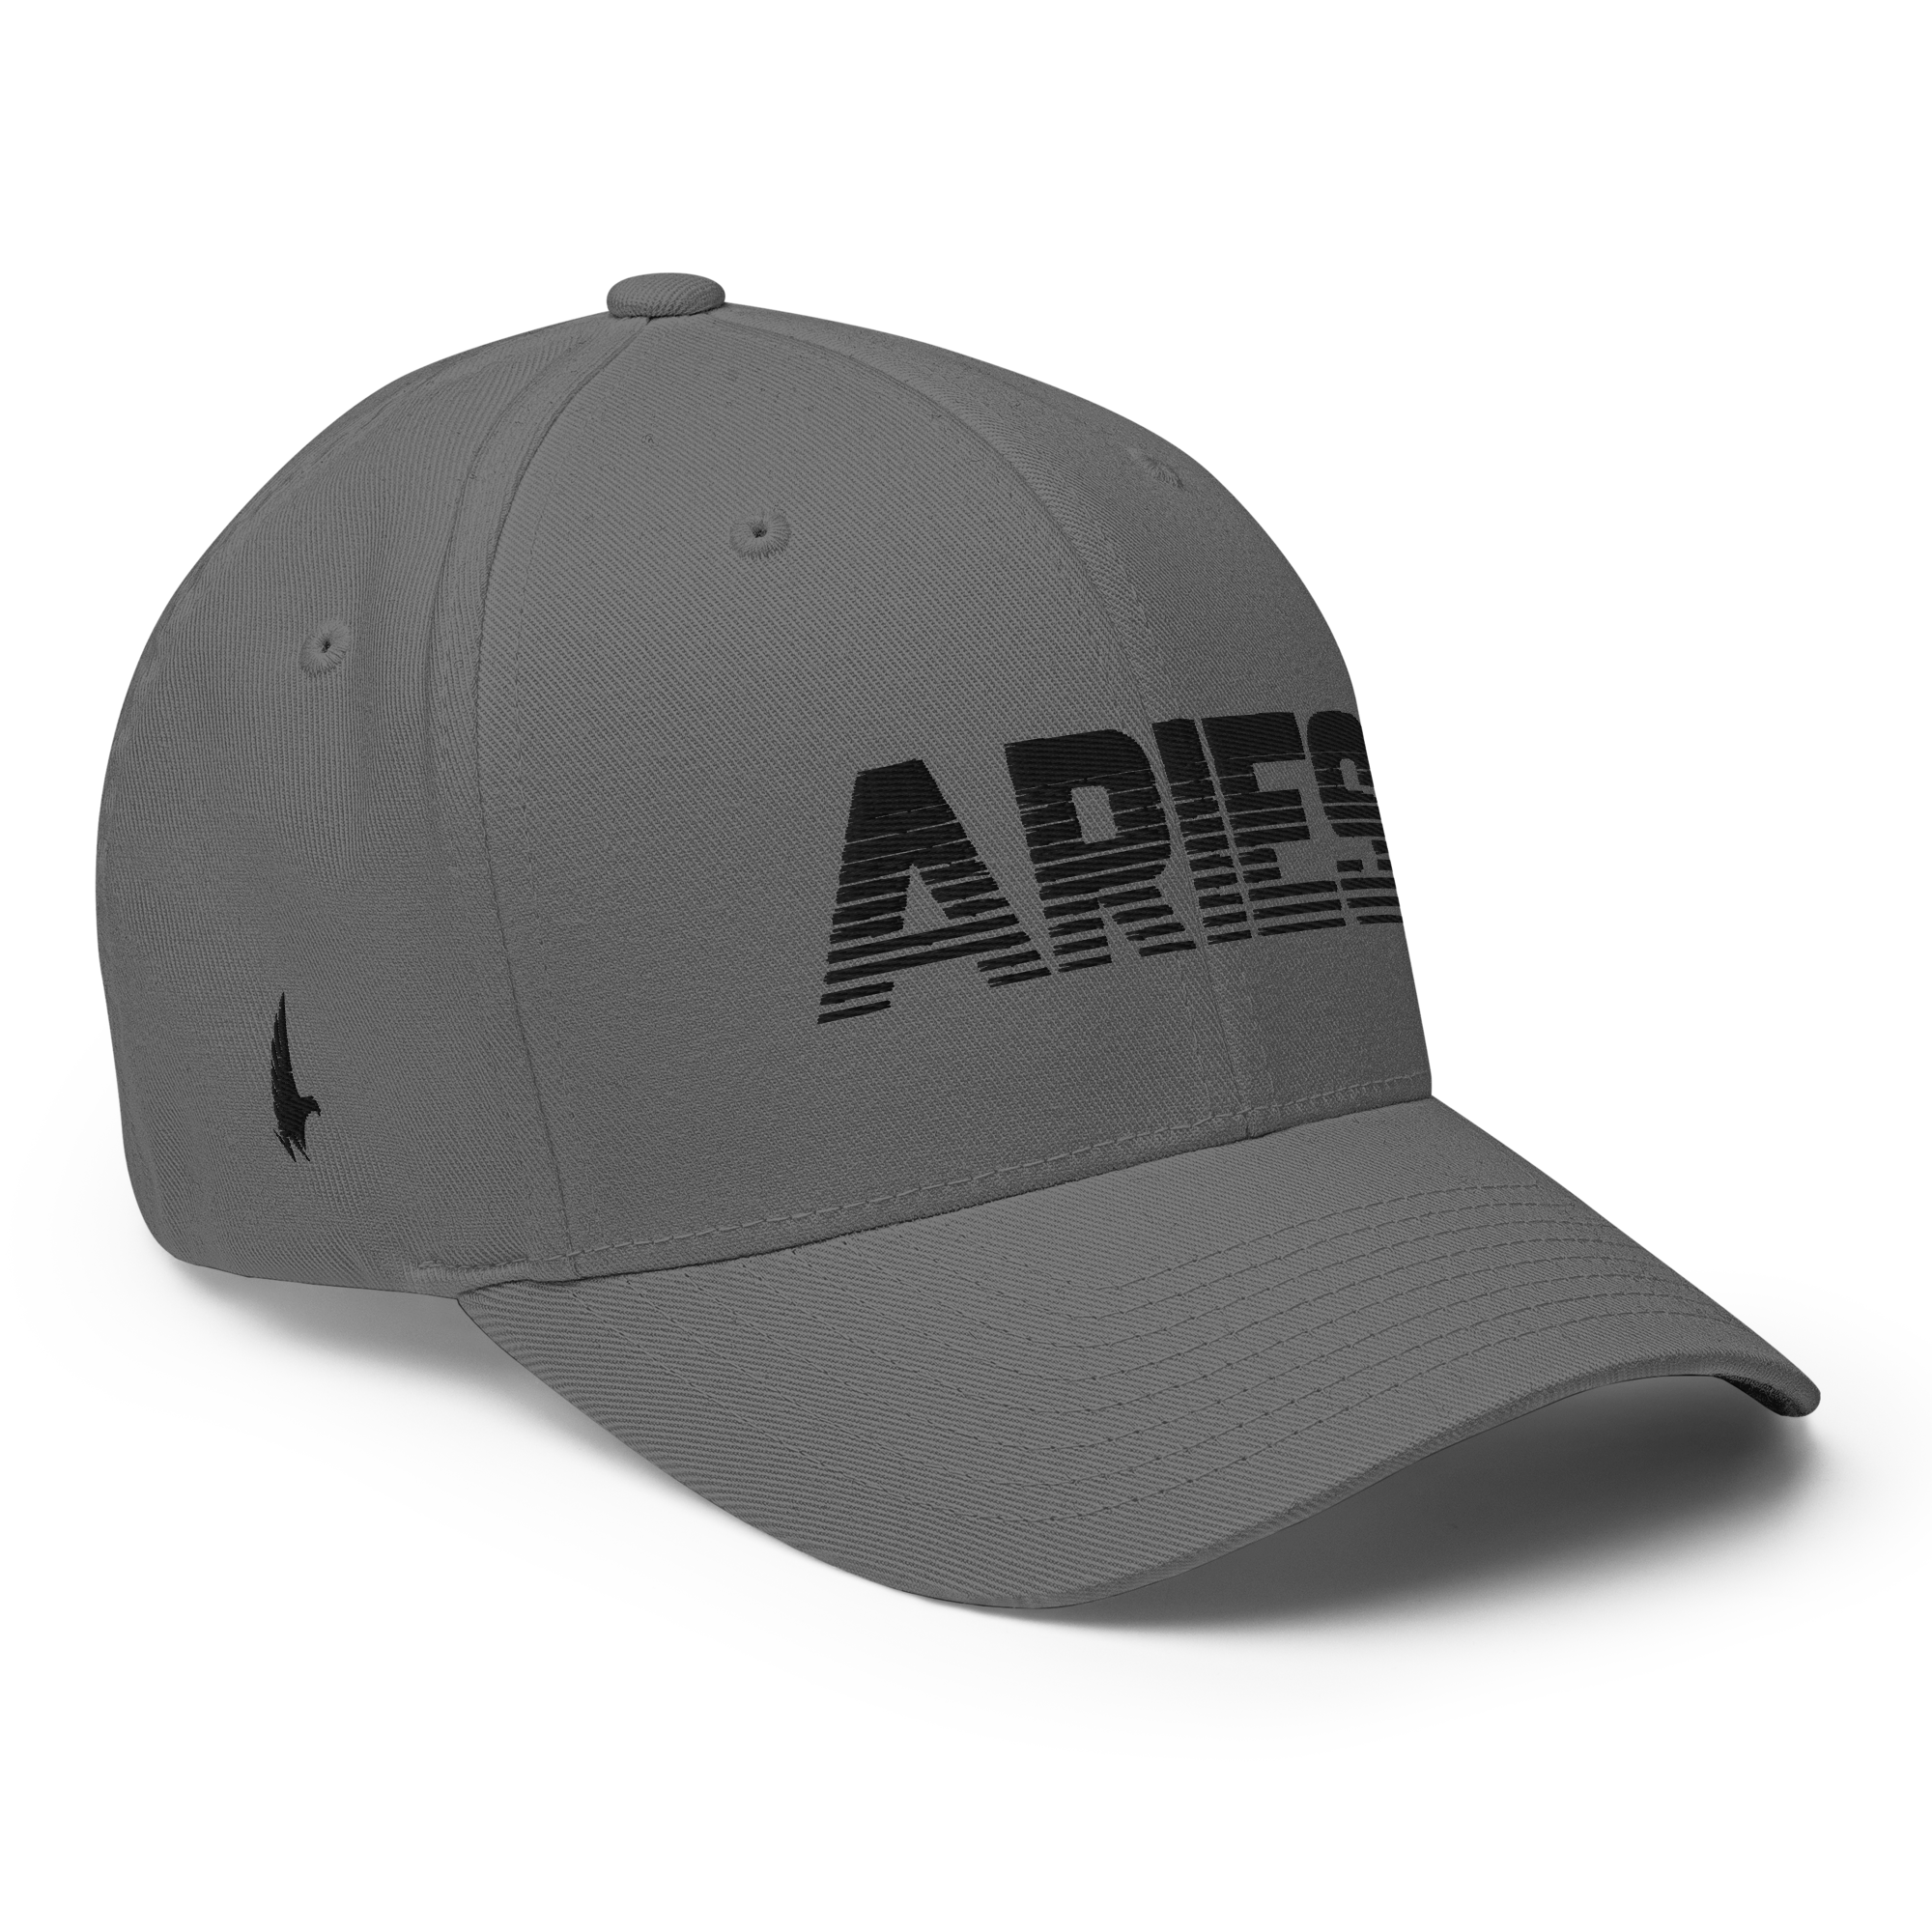 Aries Fitted Hat Grey/Black Fitted - Loyalty Vibes